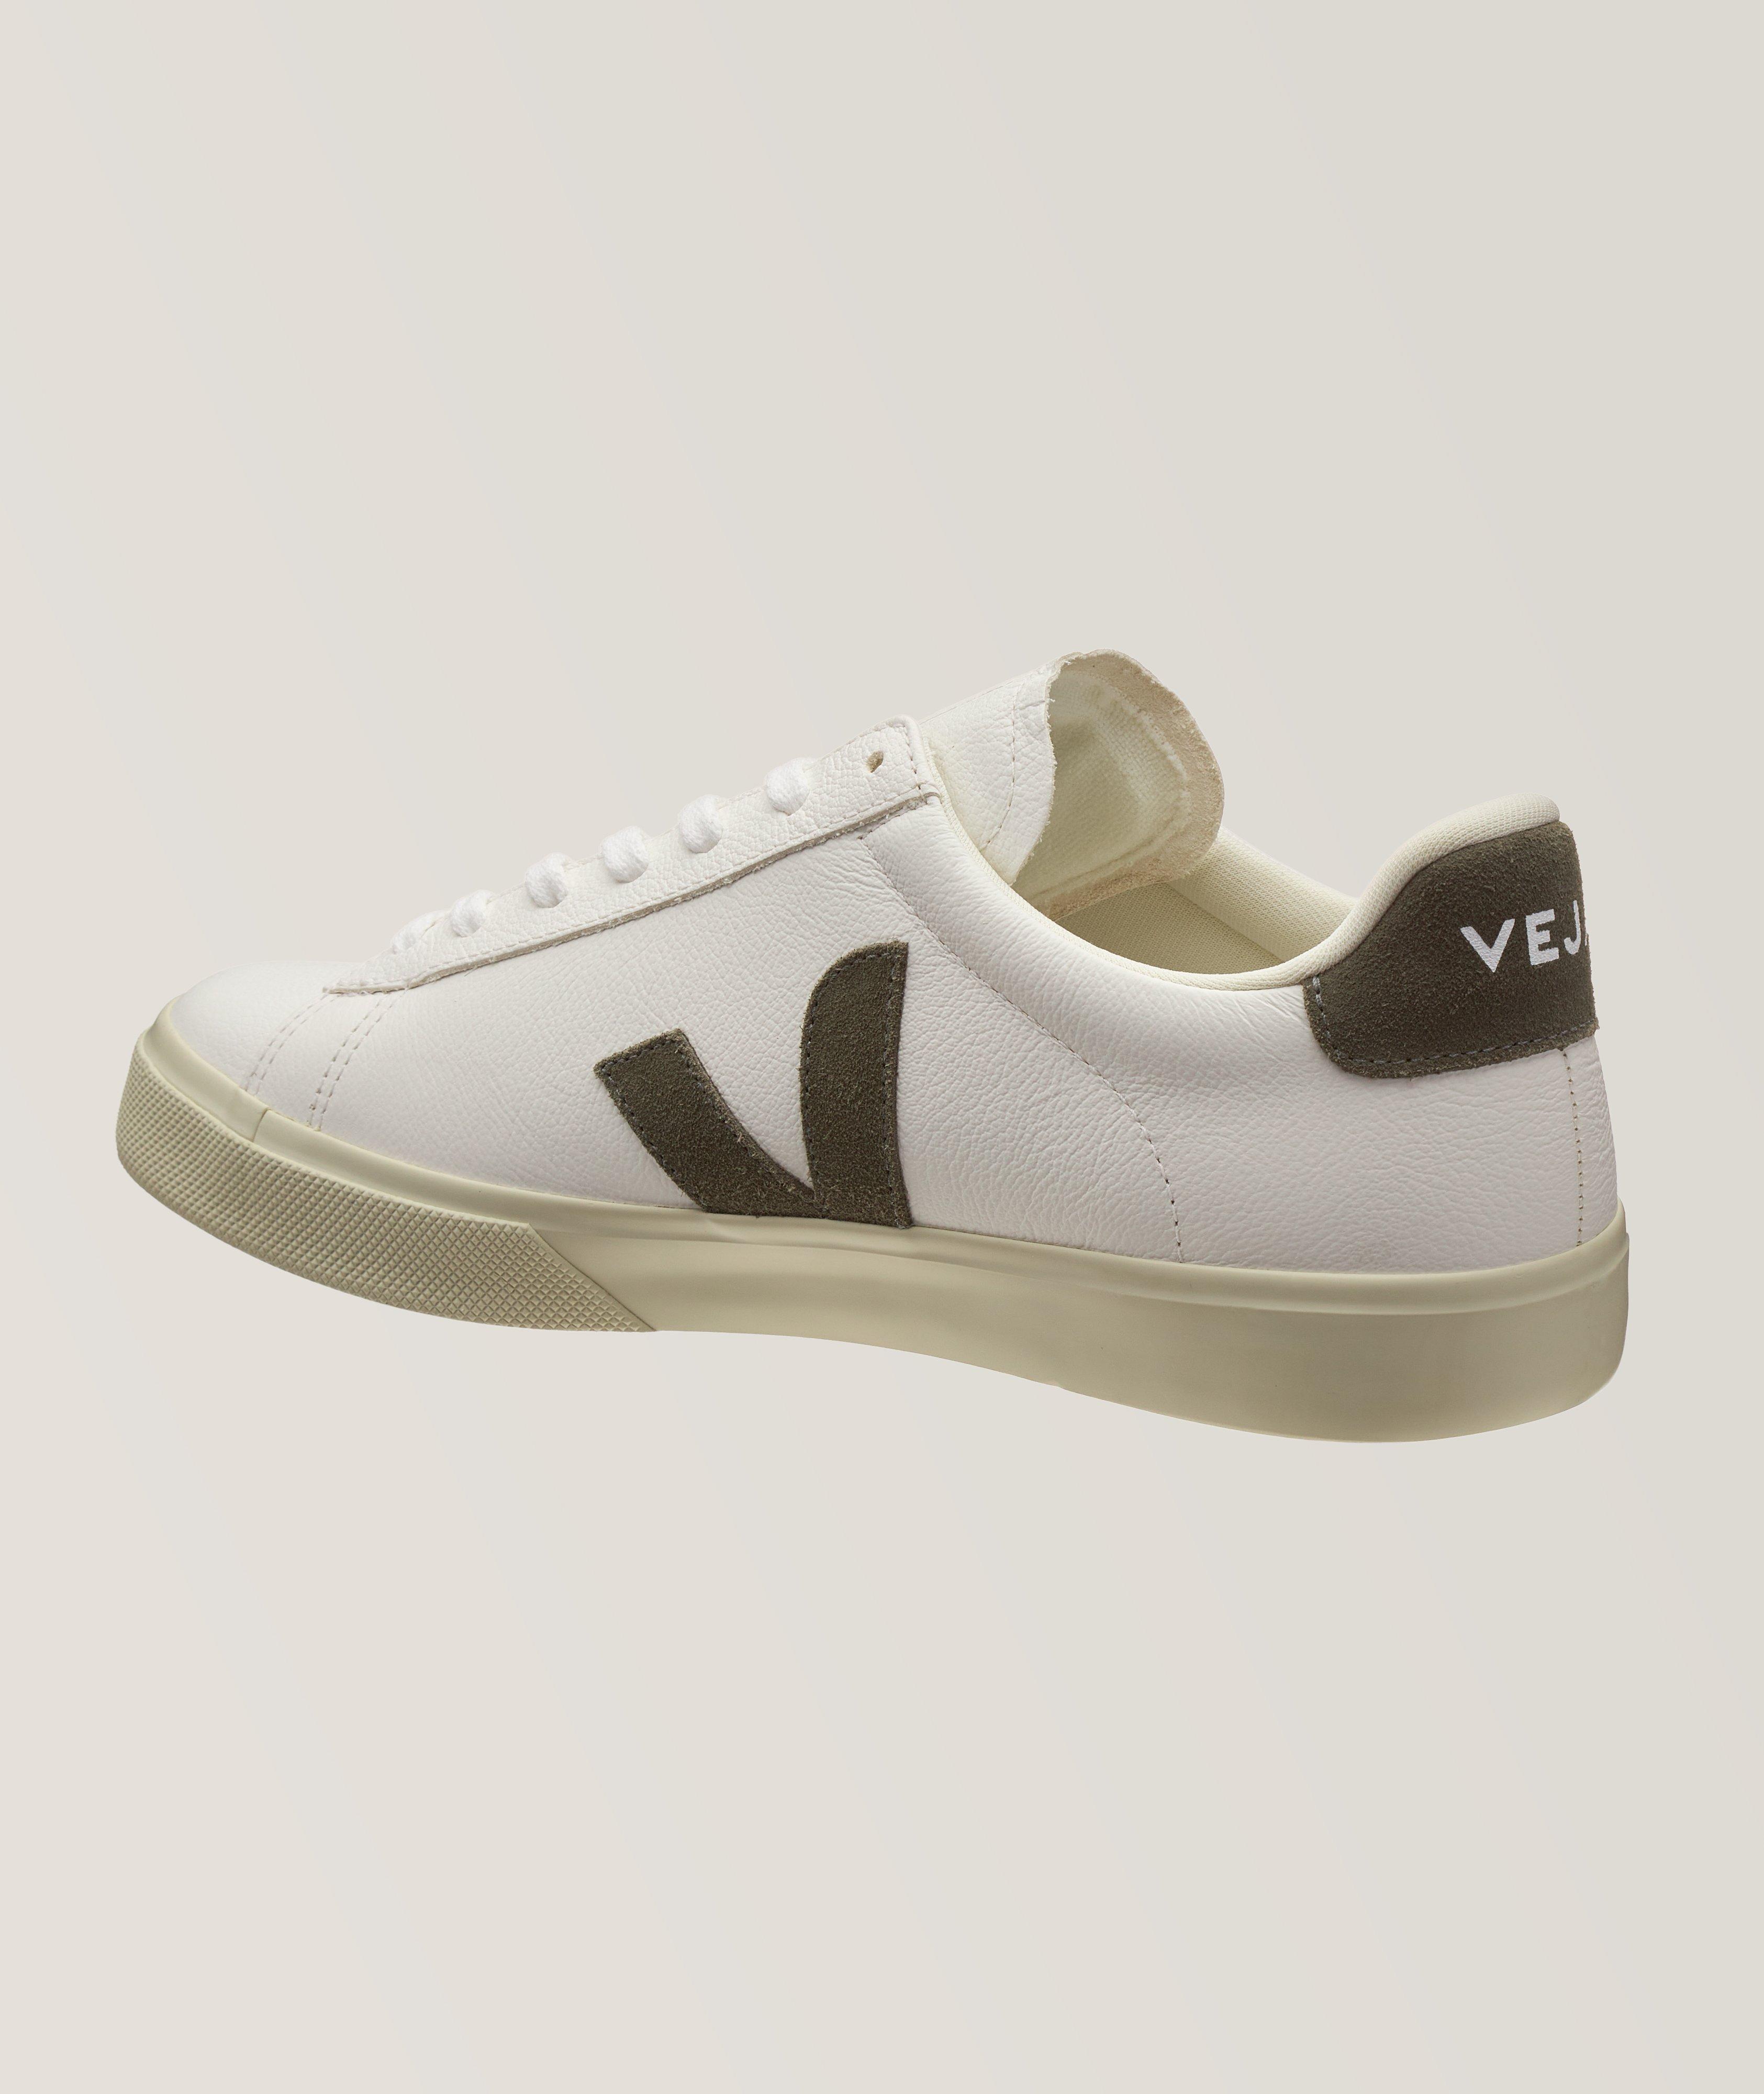 Chaussure sport Campo en cuir image 1